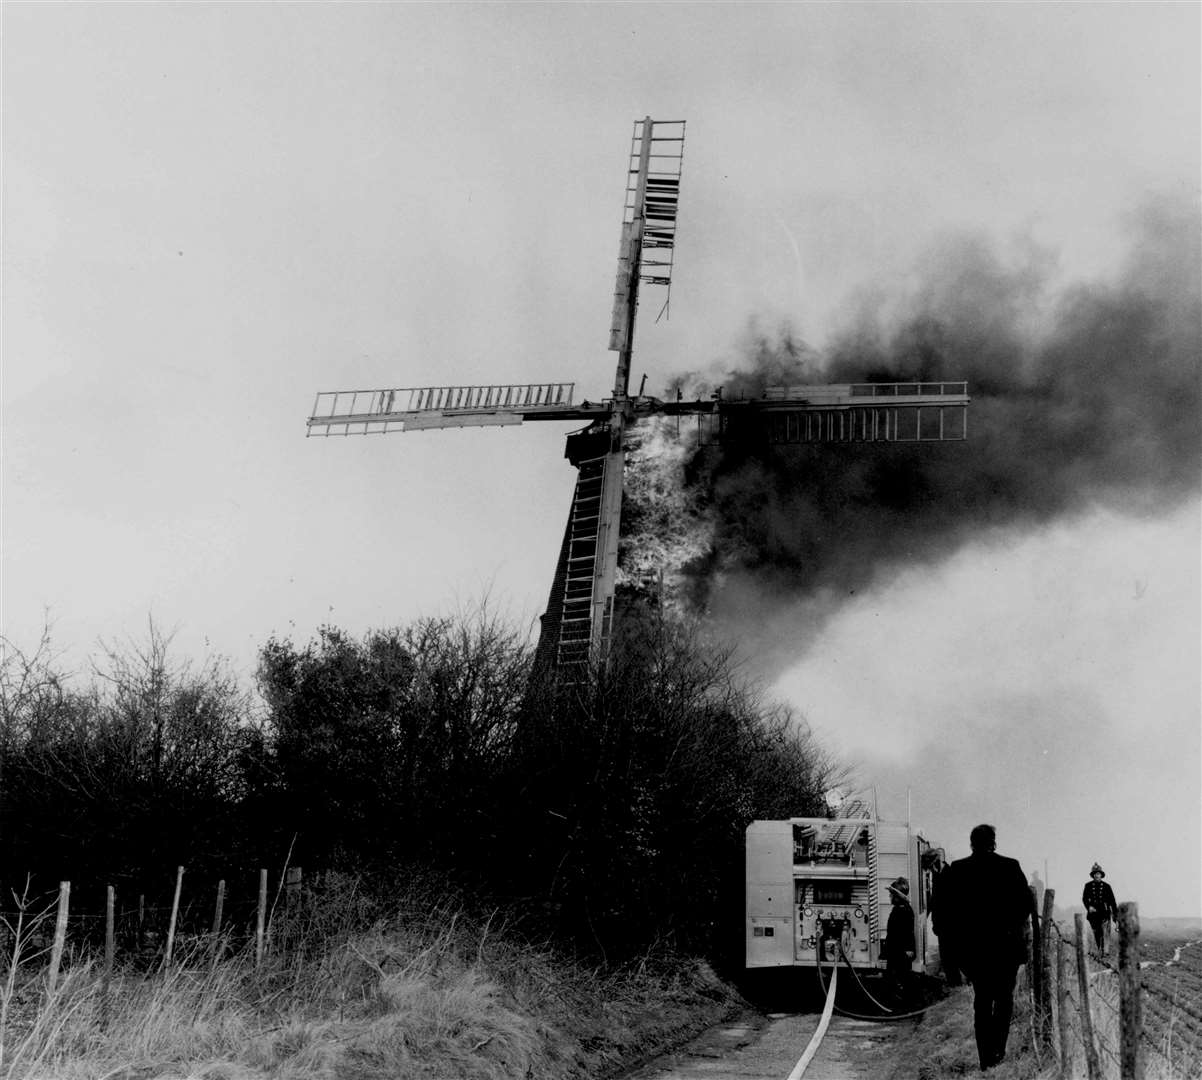 The last minutes of the 136-year-old Barham Windmill, destroyed by fire in March 1970, were captured on camera. The mill was gutted and the massive sails collapsed before flames could be brought under control